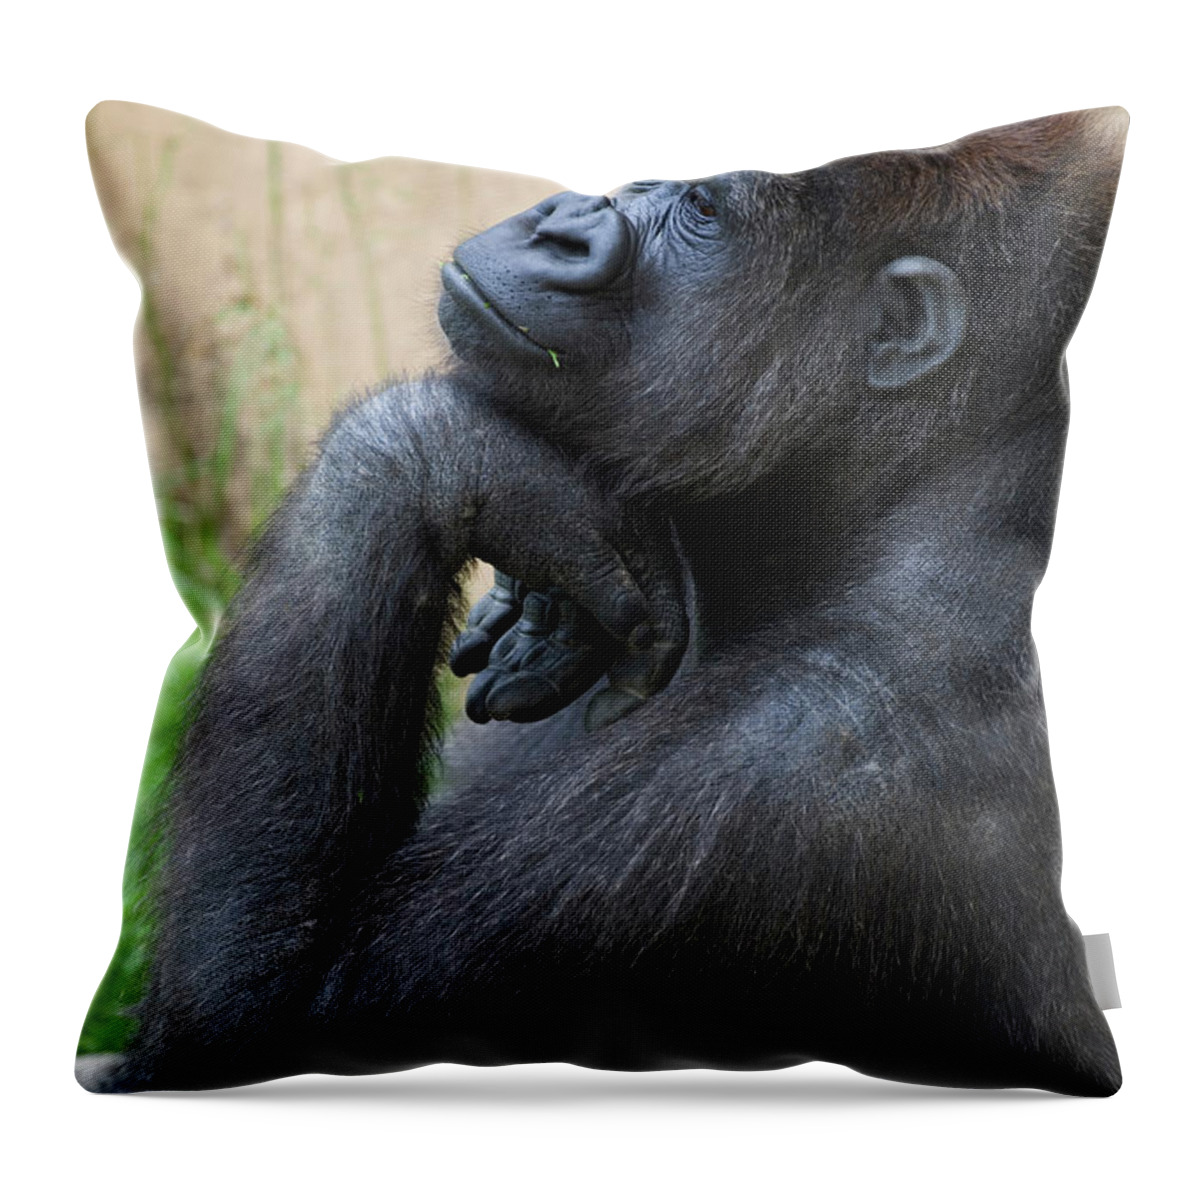 Three Quarter Length Throw Pillow featuring the photograph A Gorilla Sits In A Thinking Position by Michael Interisano / Design Pics